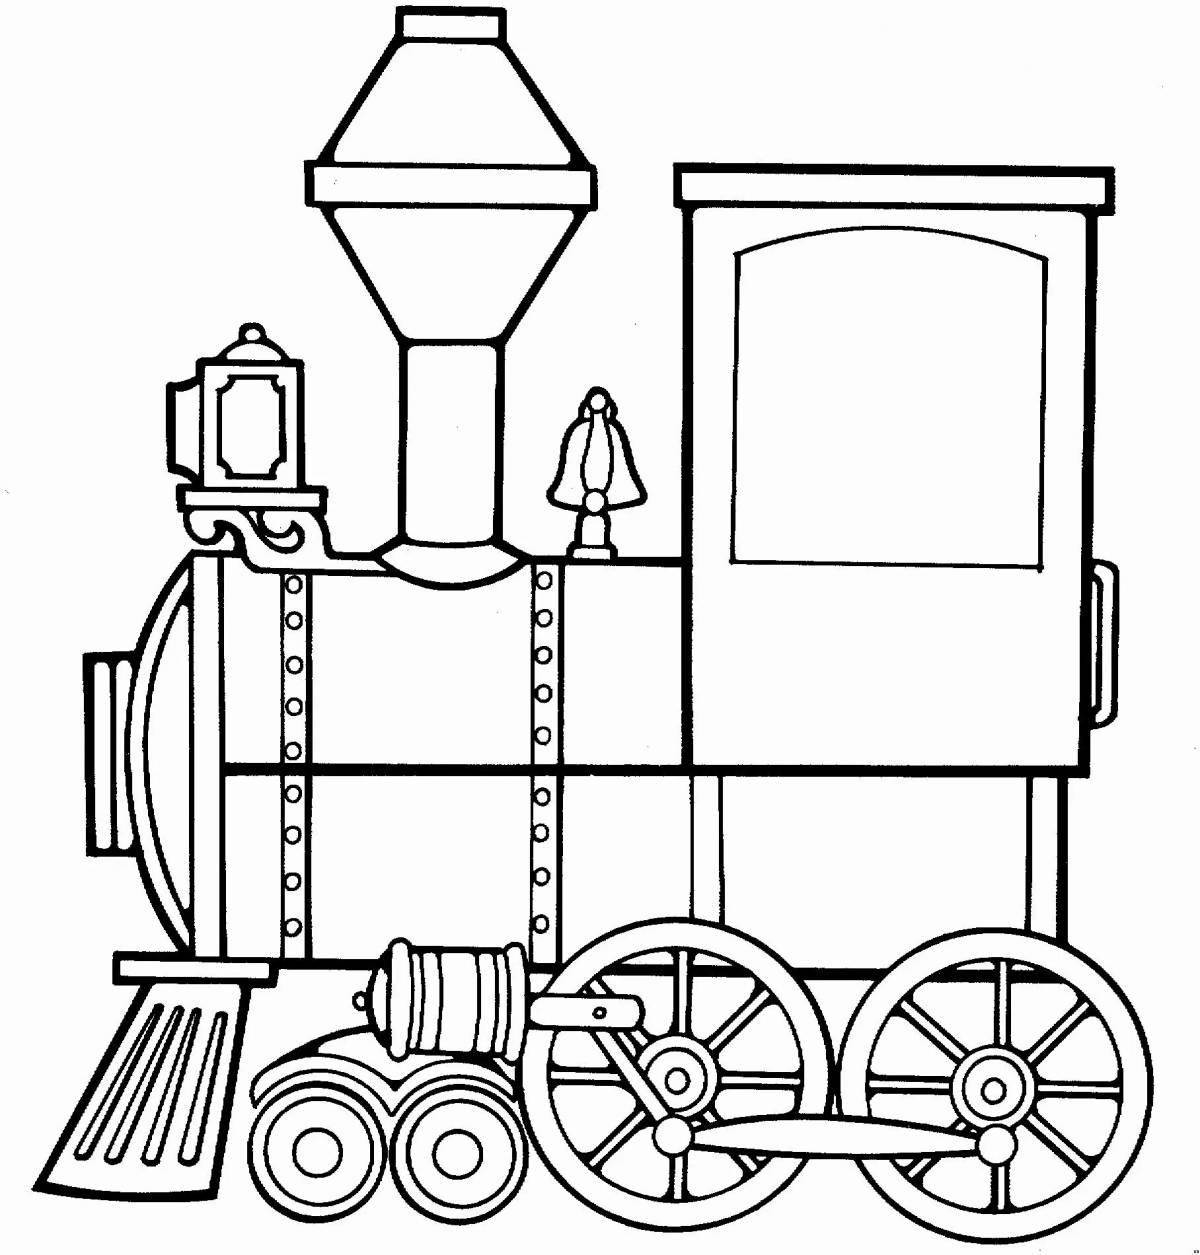 Amazing locomotive coloring book for kids